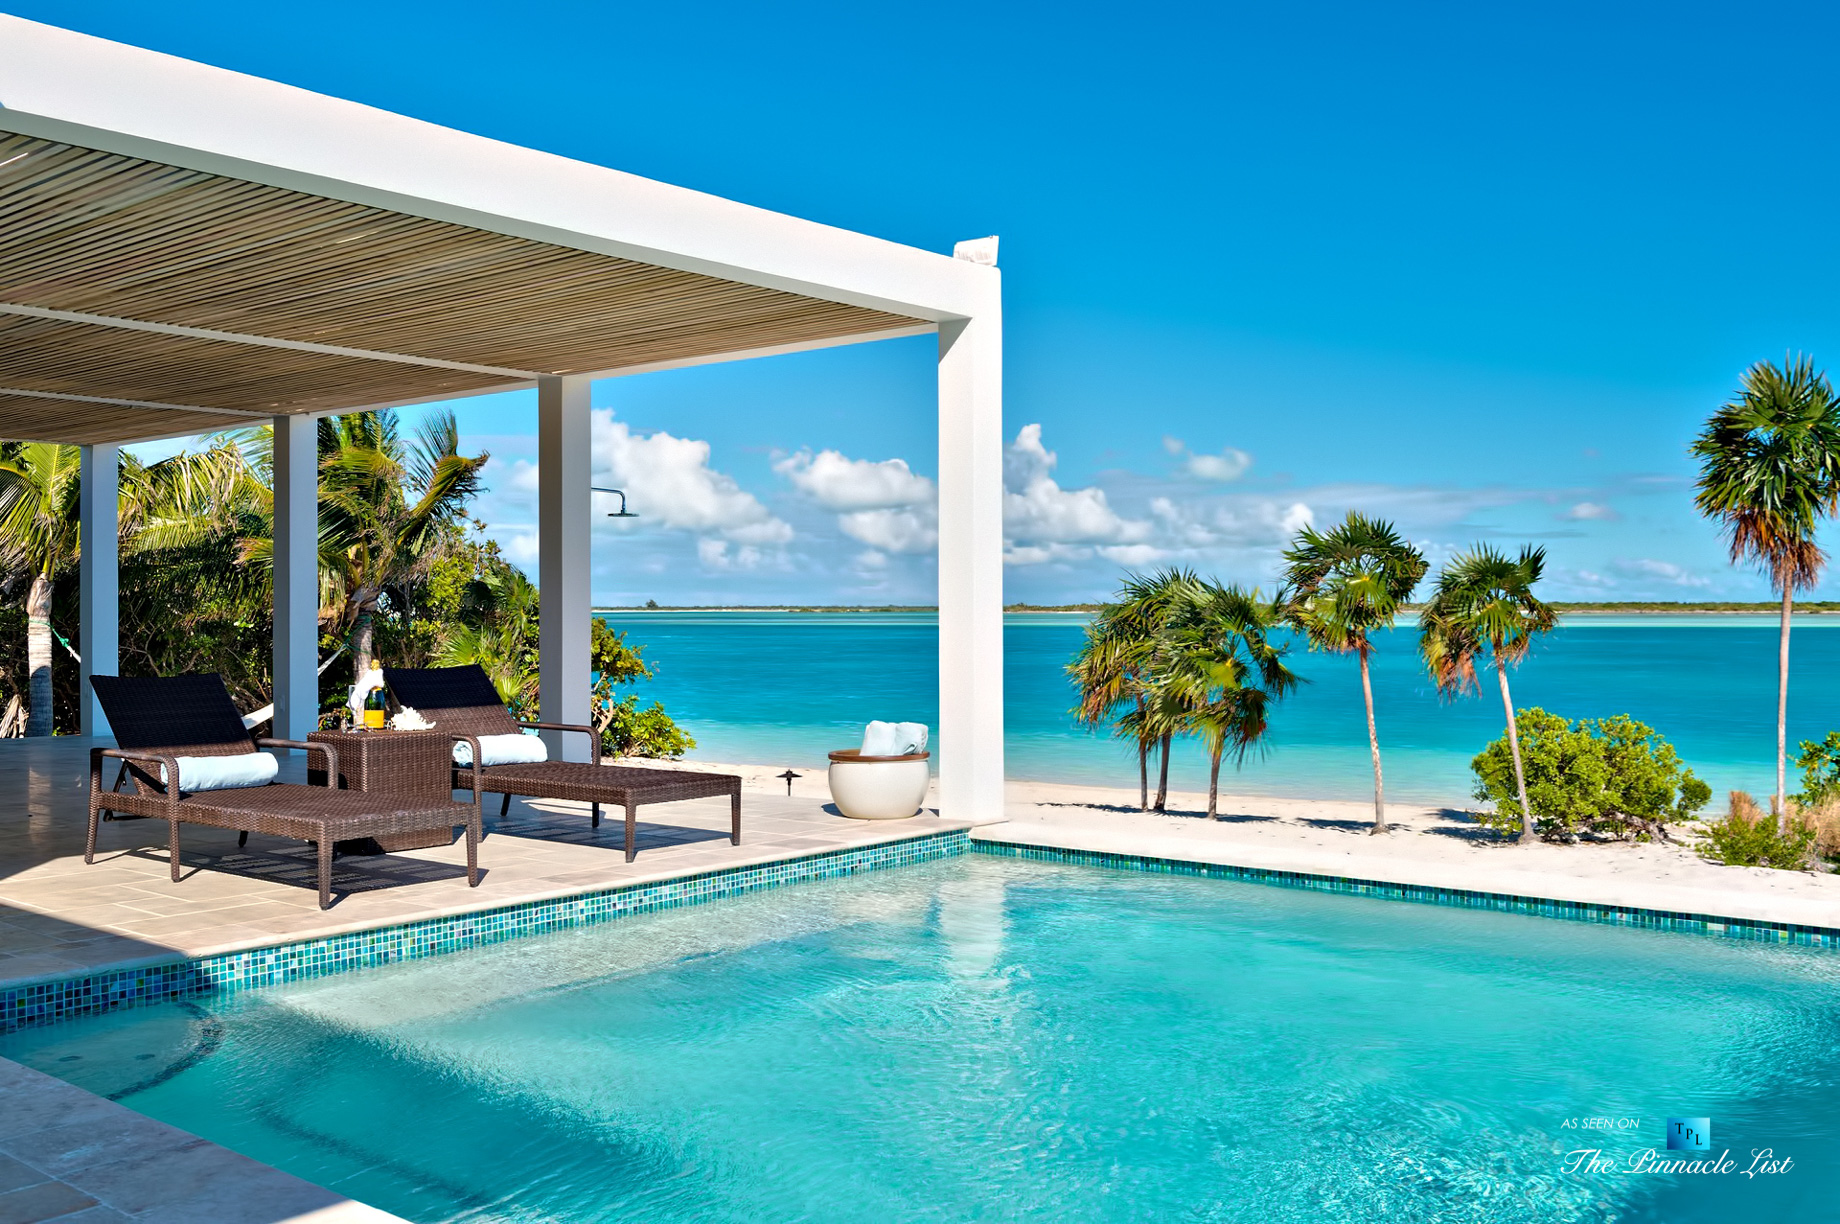 Villa Aquazure – Providenciales, Turks and Caicos Islands – Covered Sundeck and Pool – Luxury Real Estate – Beachfront Home